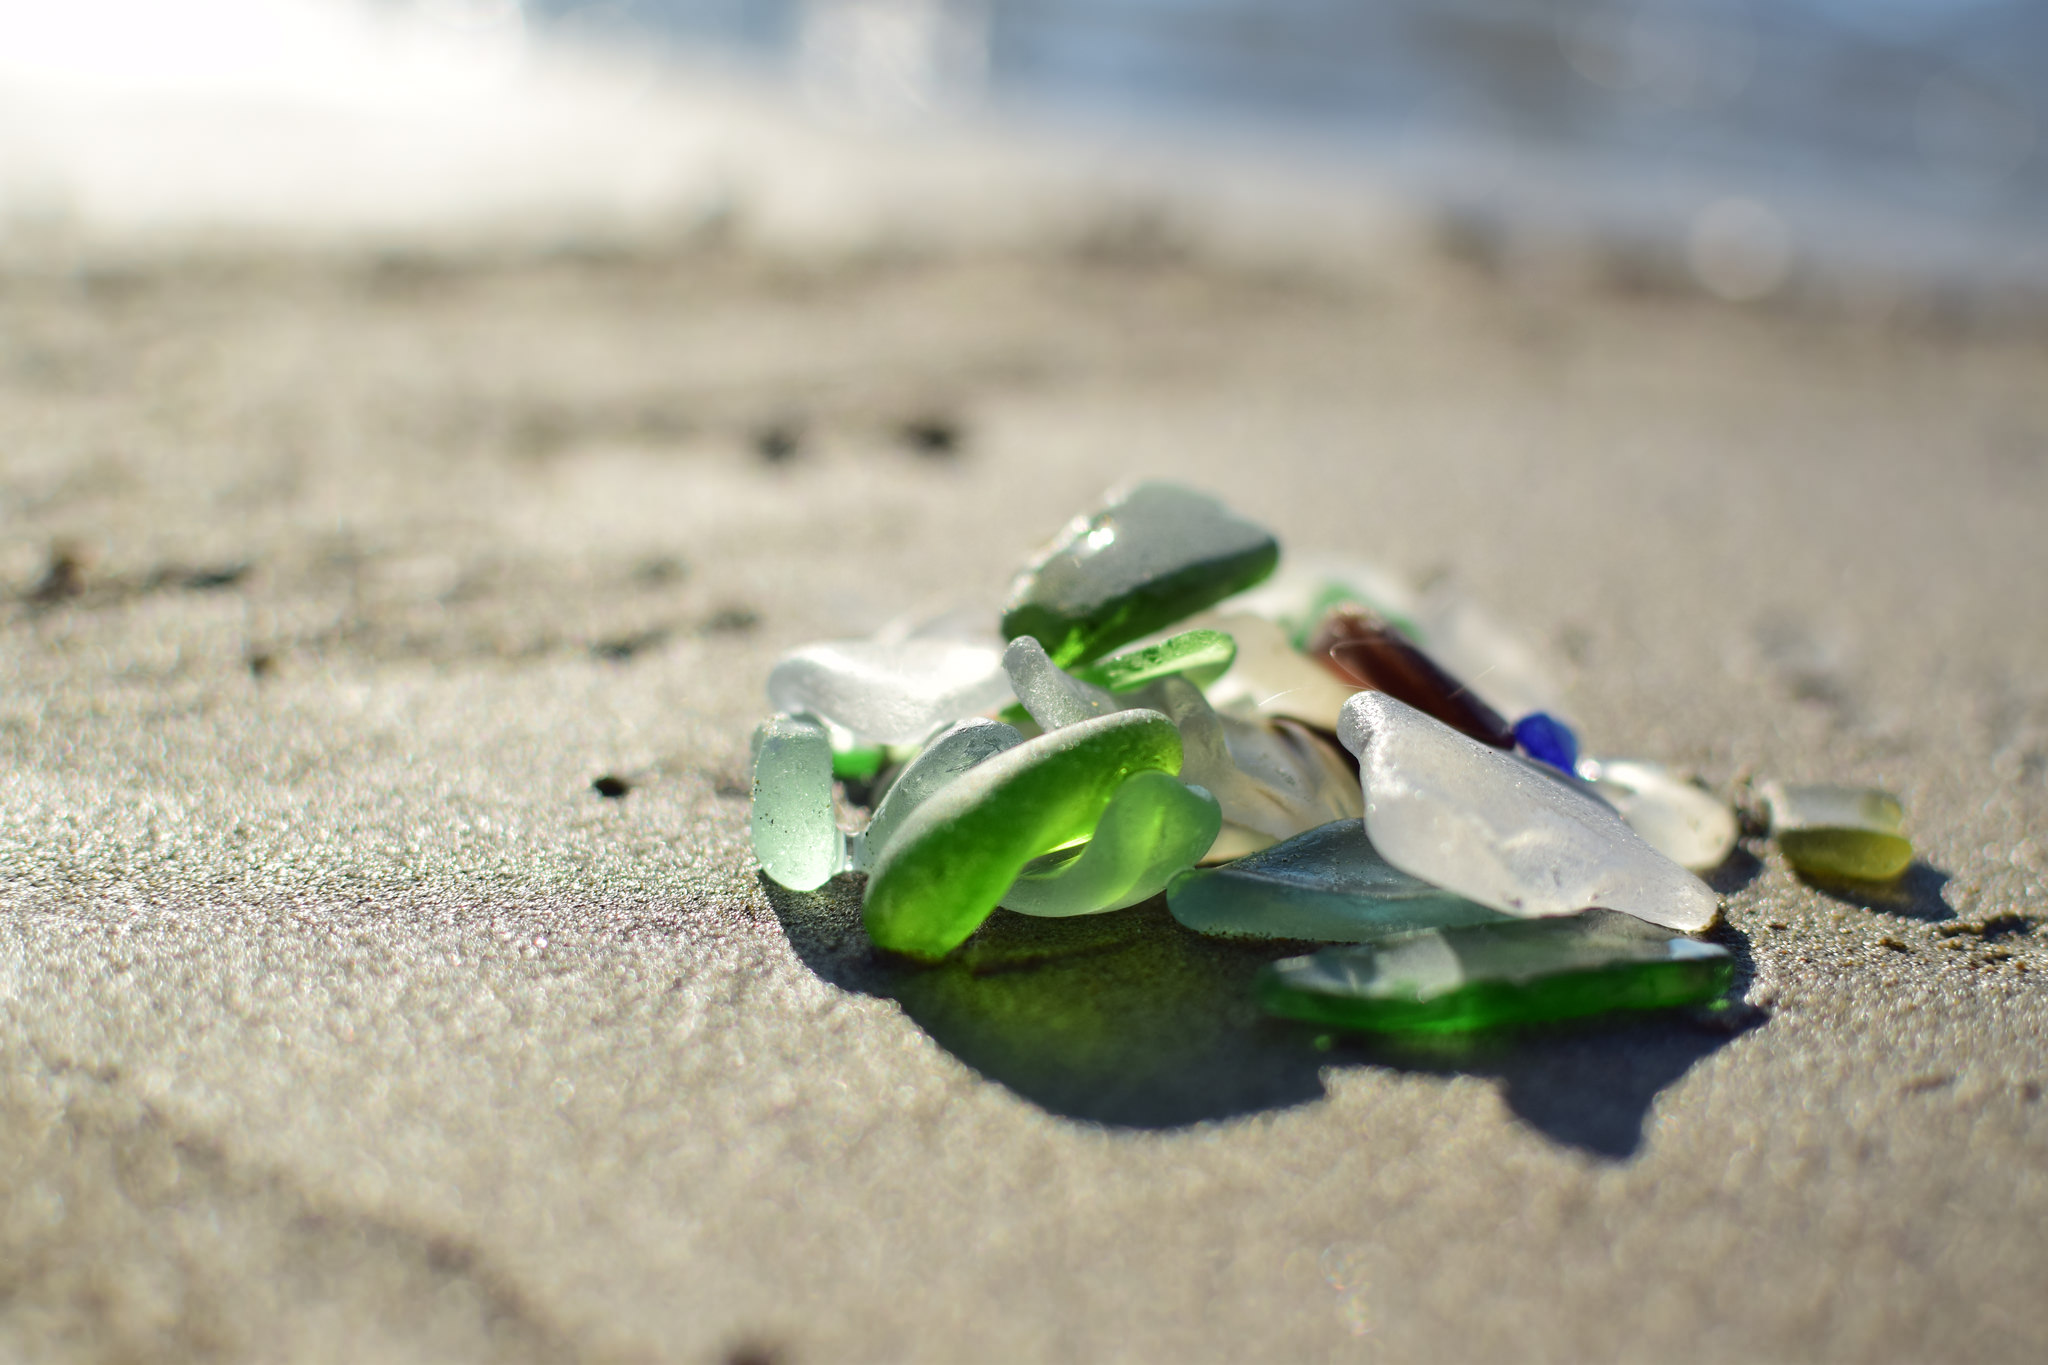 You’ll Want To Visit These 8 Beaches For The Most Beautiful Connecticut Sea Glass